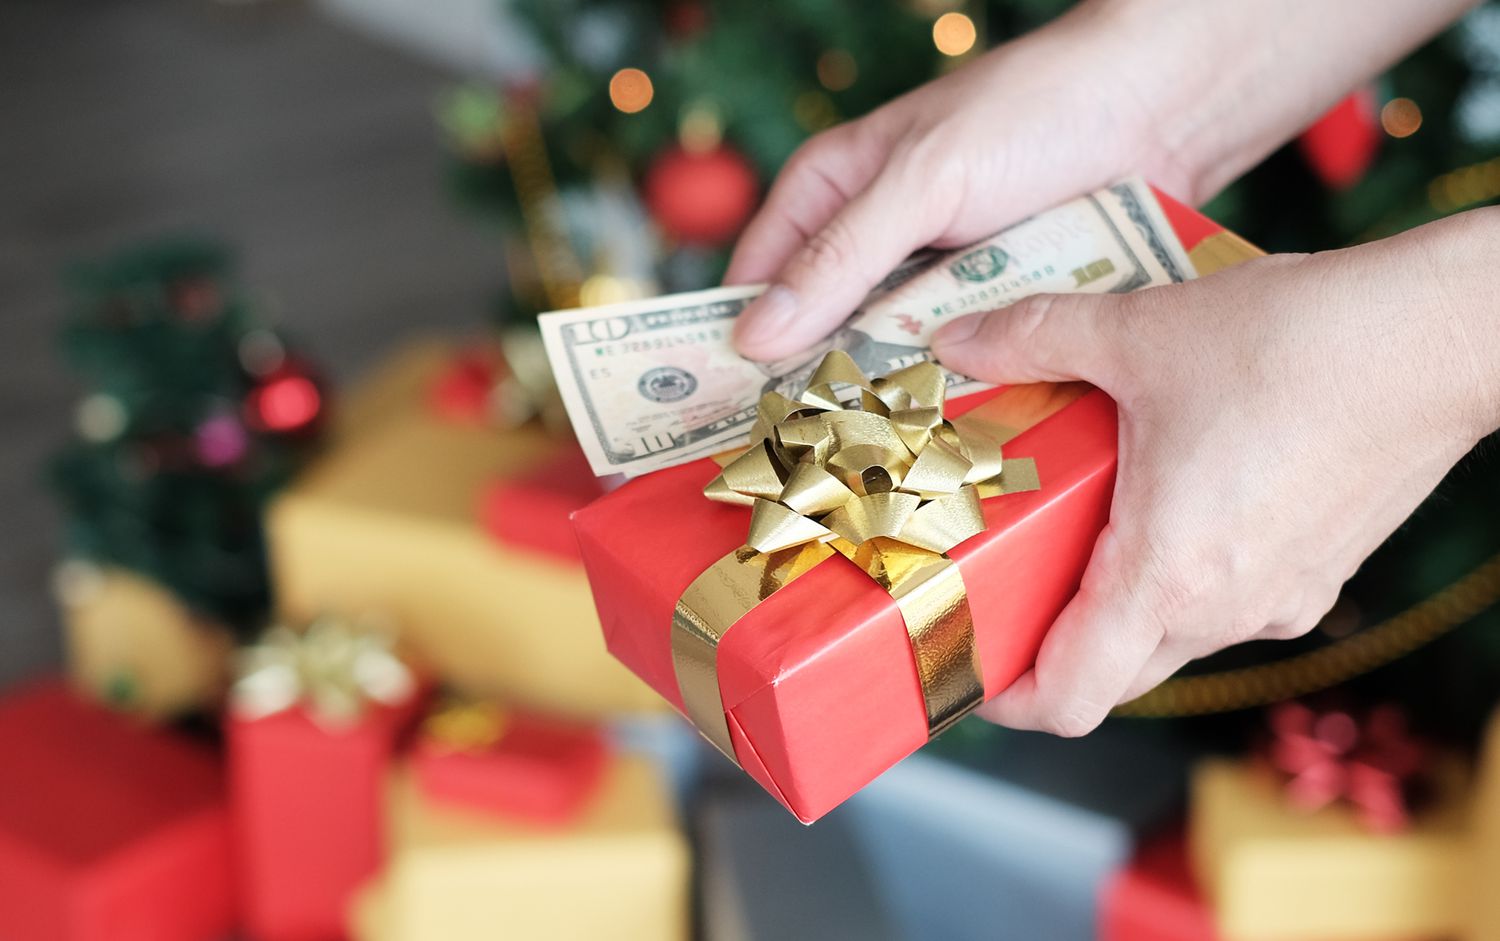 hands with cash and a small wrapped gift near a Christmas tree